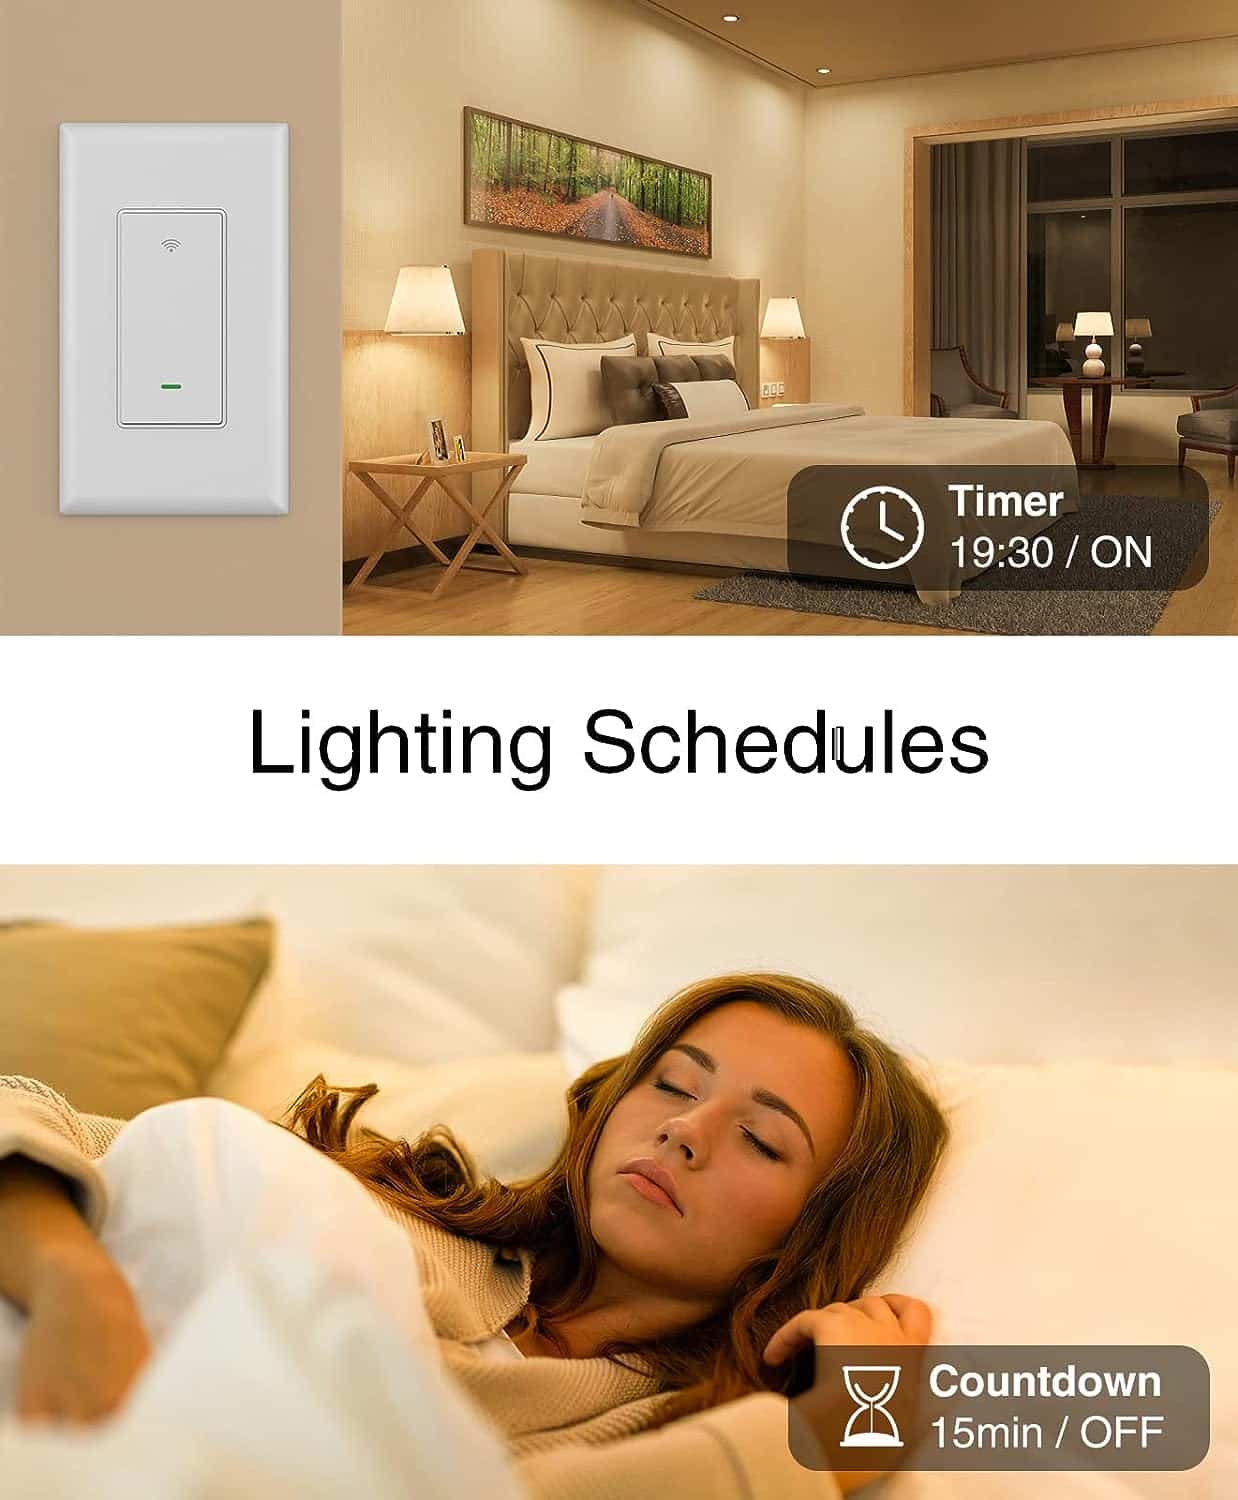 GHome Smart Switch 3 Pack Light Review: Transform Your Home into a Smart Haven